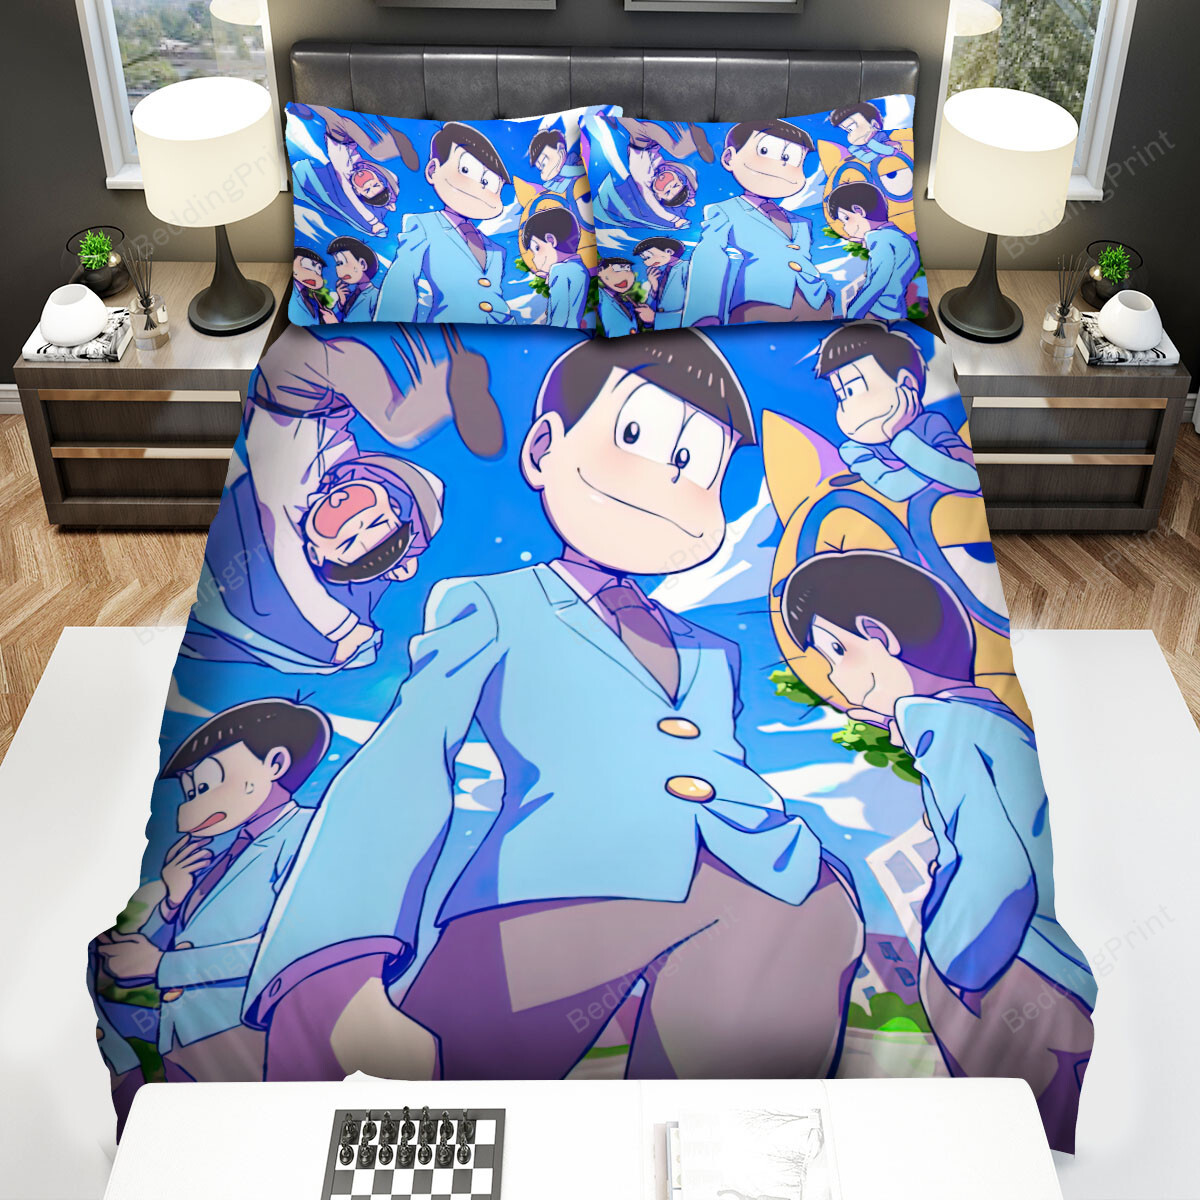 Mr. Osomatsu The Sextuplets In Blue Suits Bed Sheets Spread Duvet Cover Bedding Sets